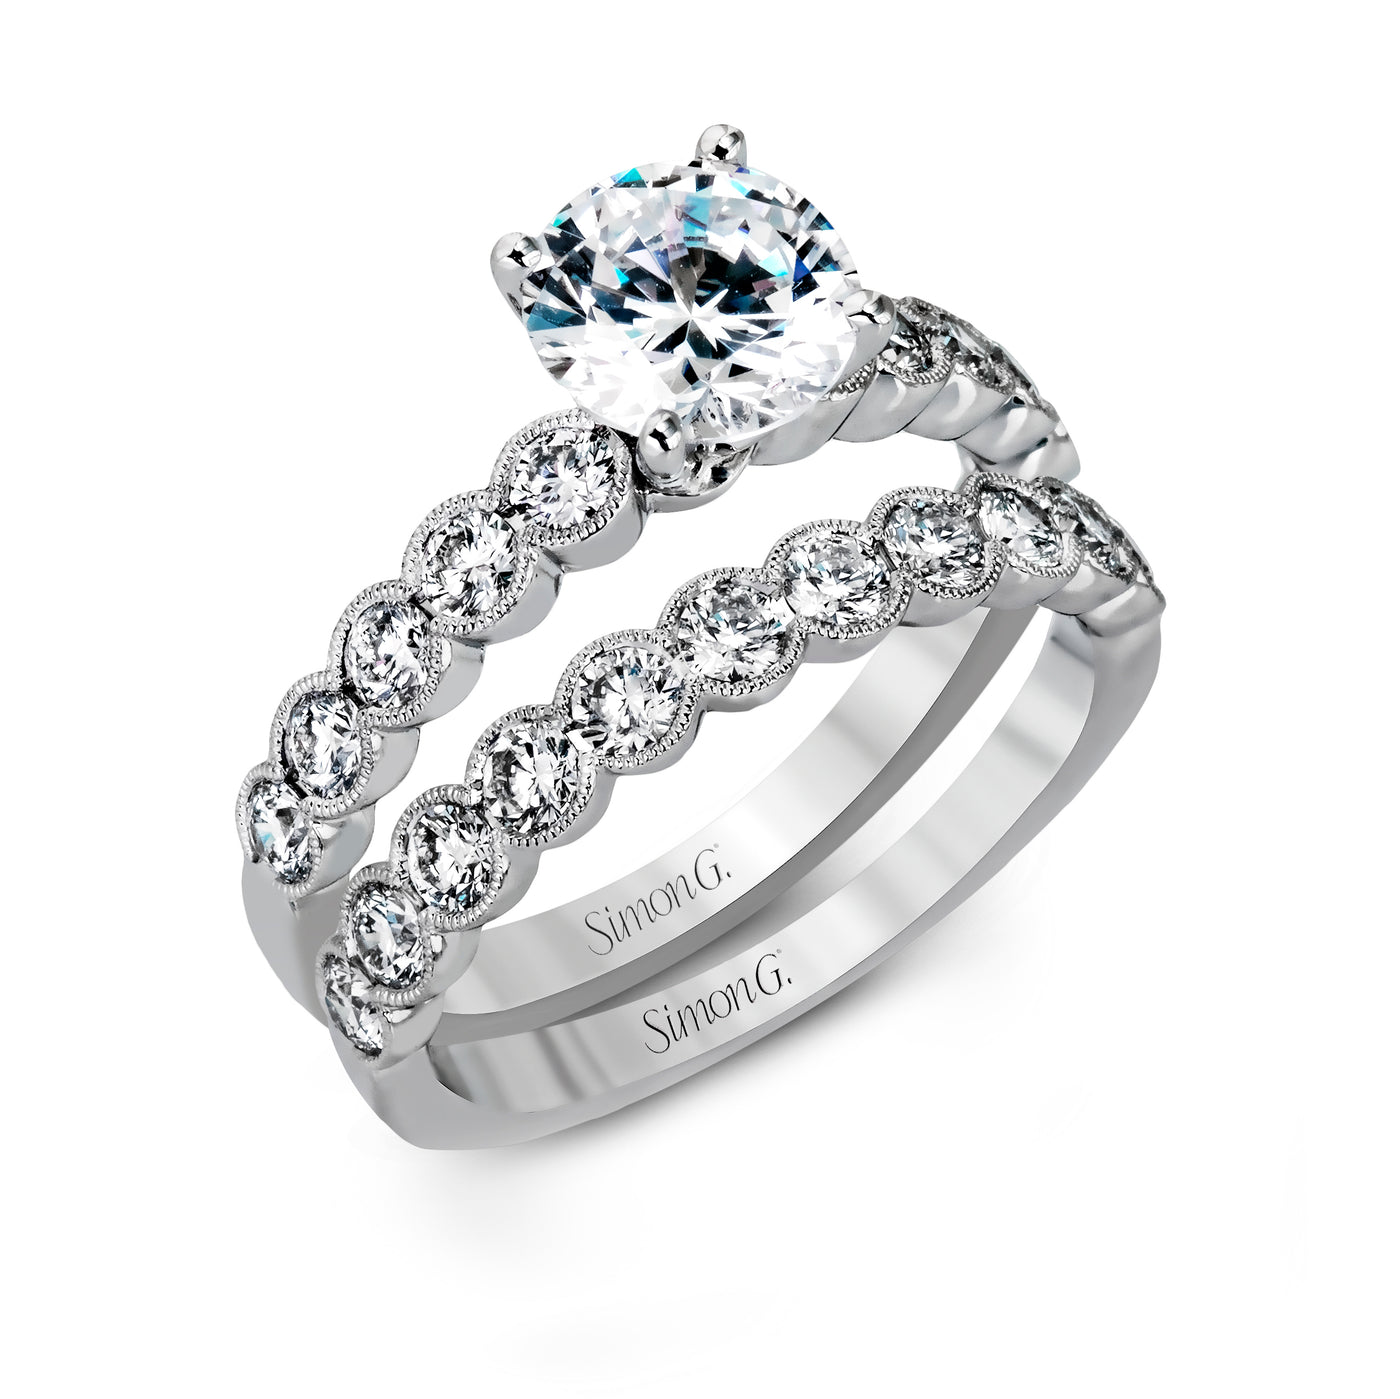 Simon G MR2566 Diamond Engagement Ring and Band in White Gold